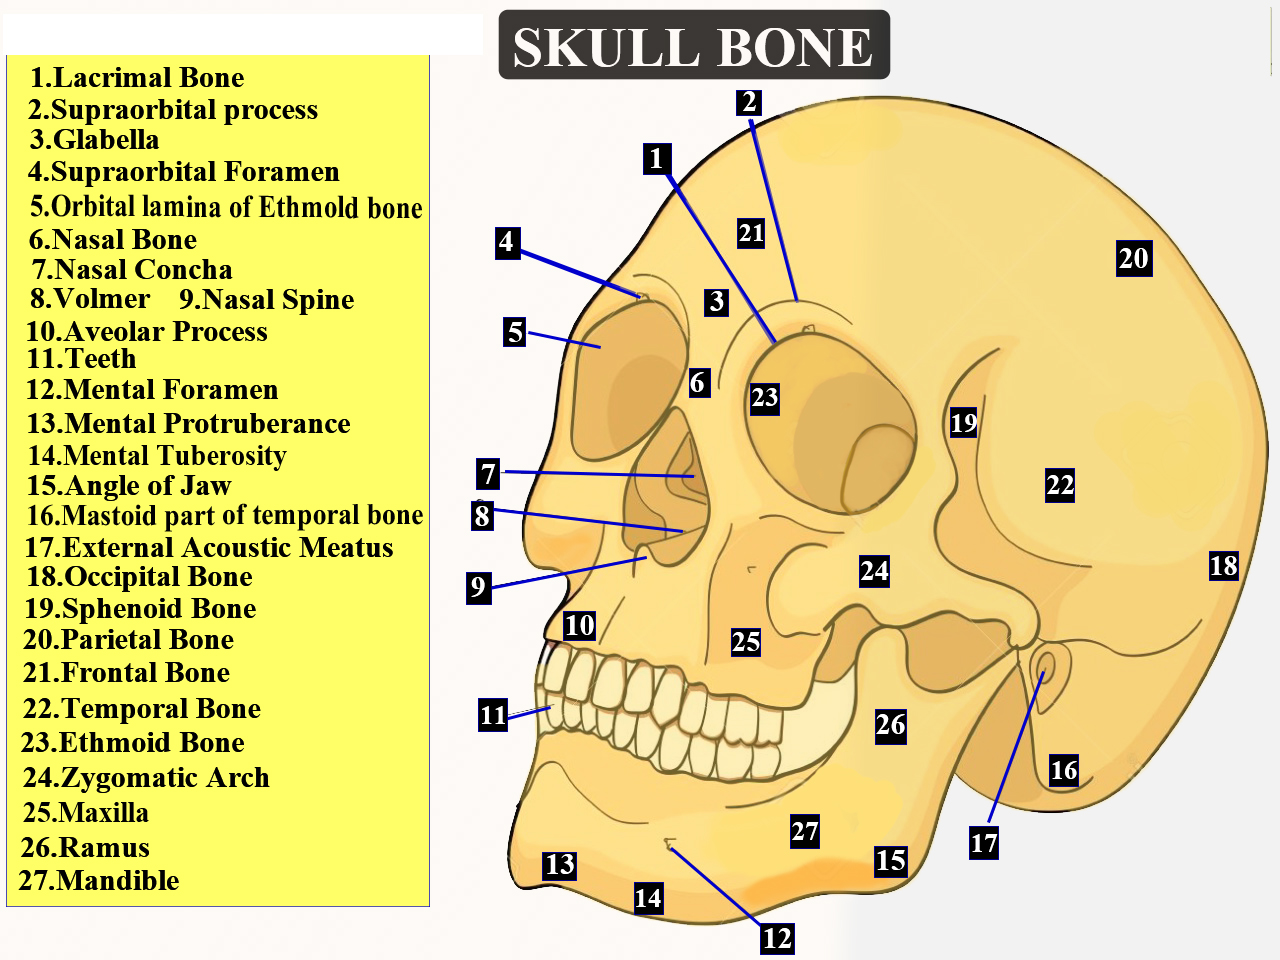 total-number-of-bones-found-in-the-human-skull-is-a-22-b-29-c-35-d-72